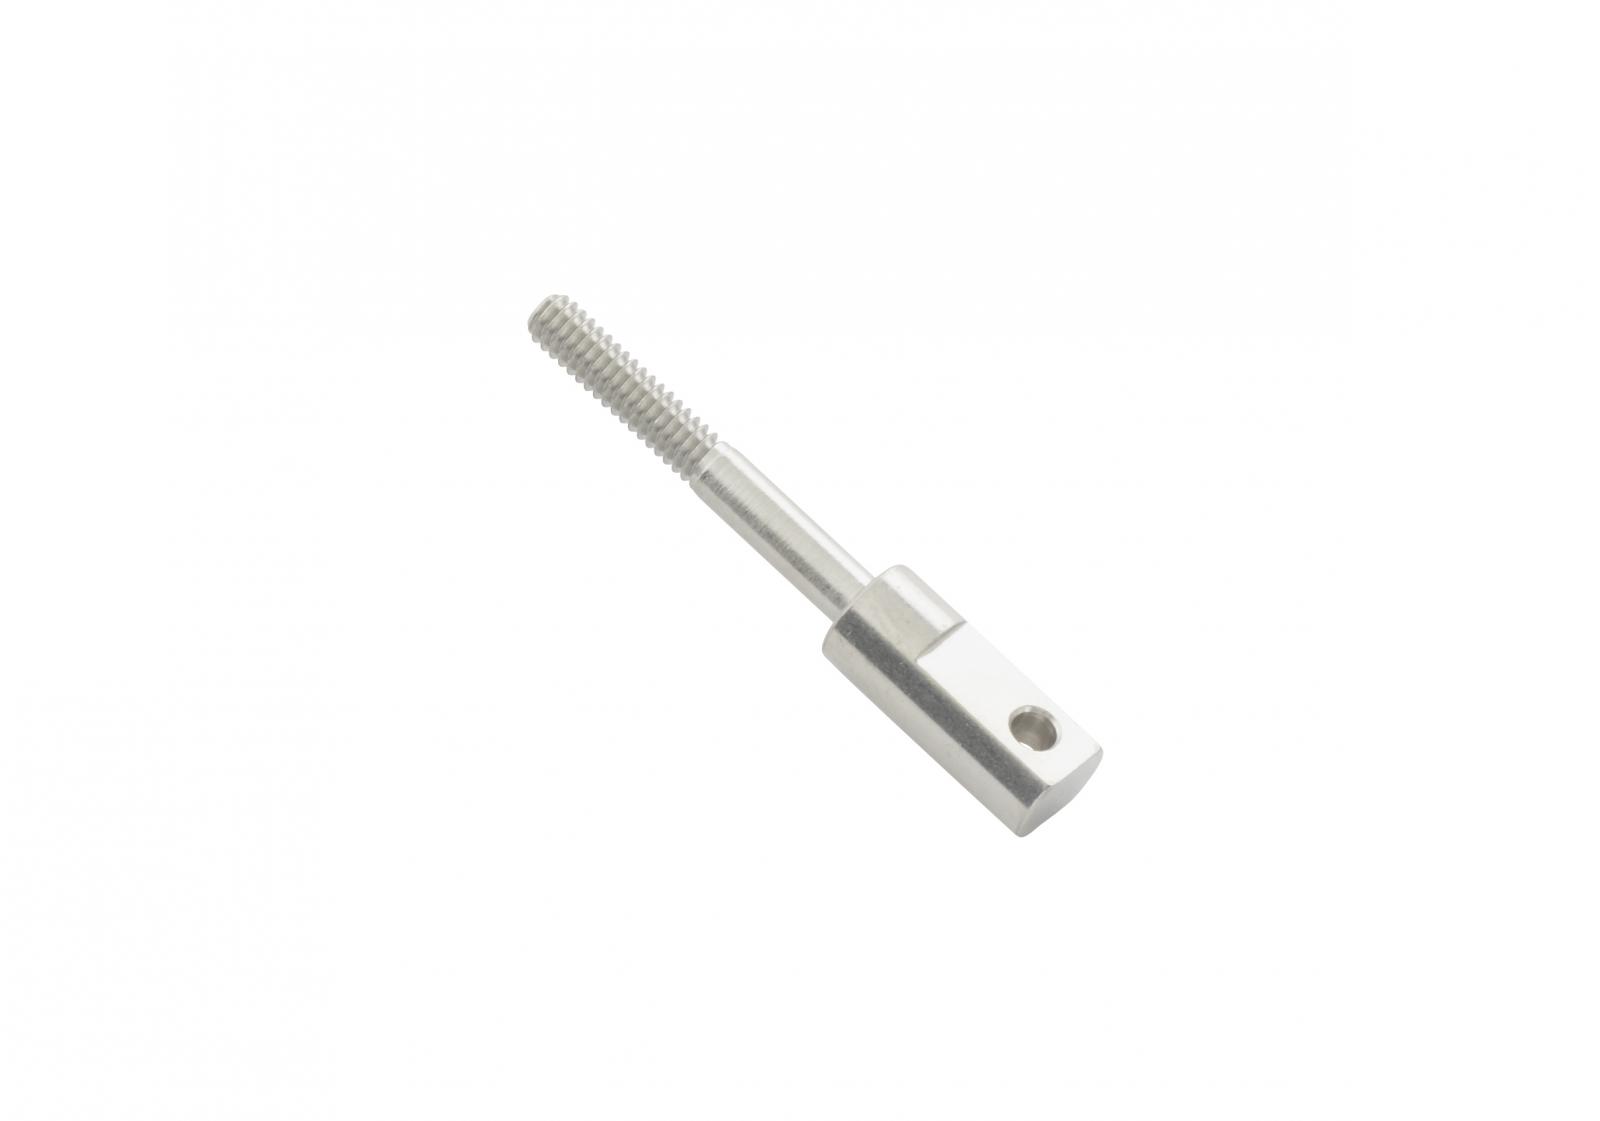 TapeTech® Coupler. Part number 190034